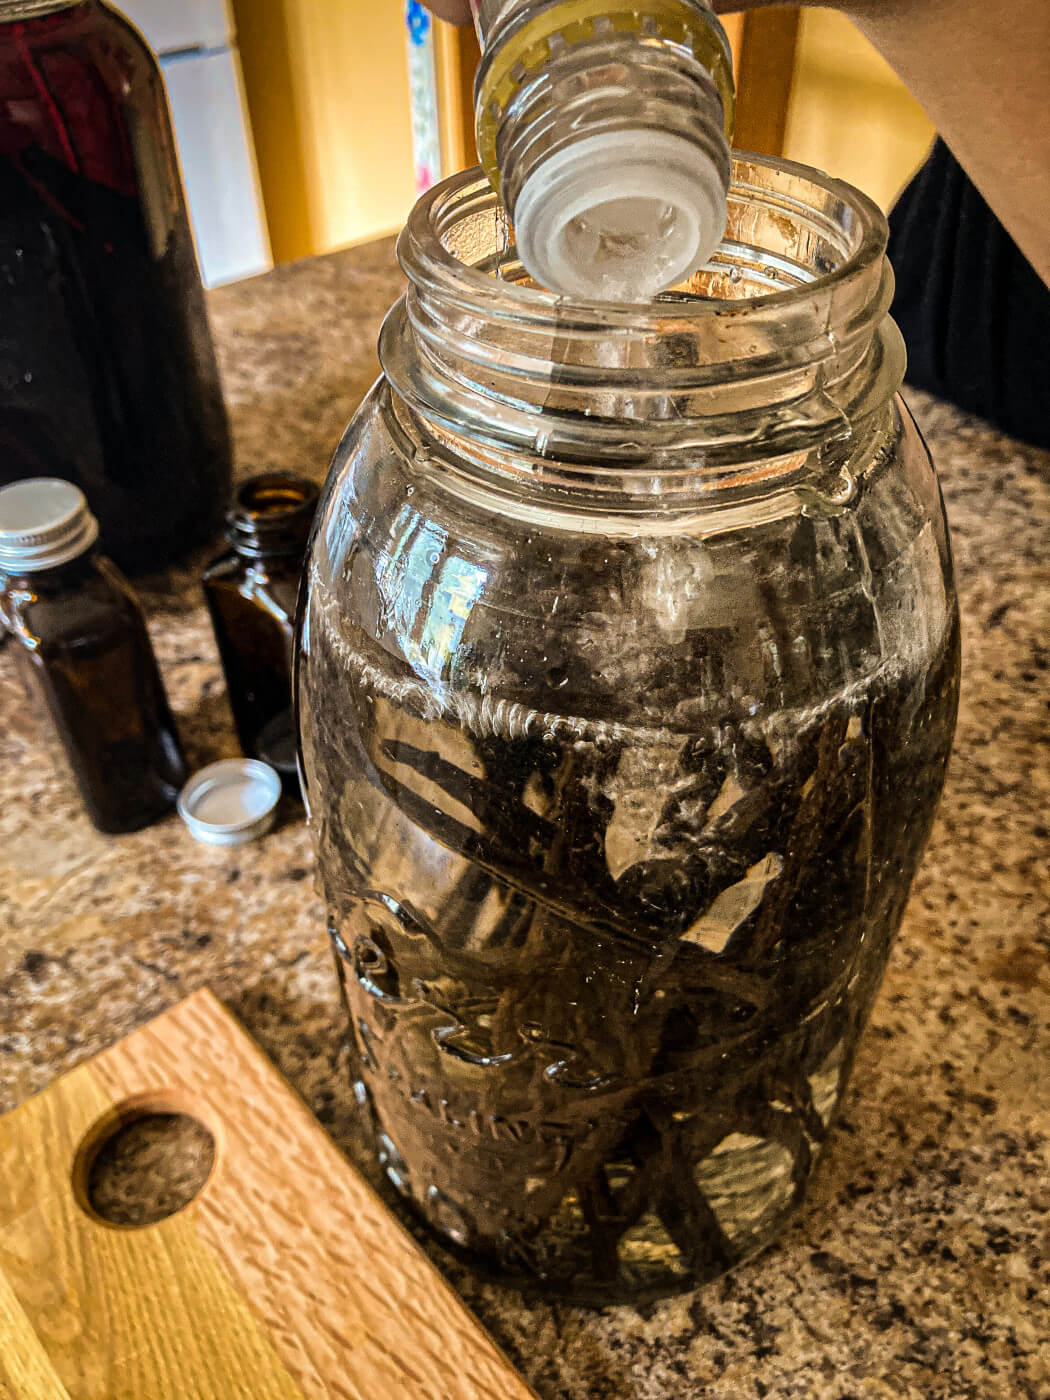 Cover vanilla beans with vodka